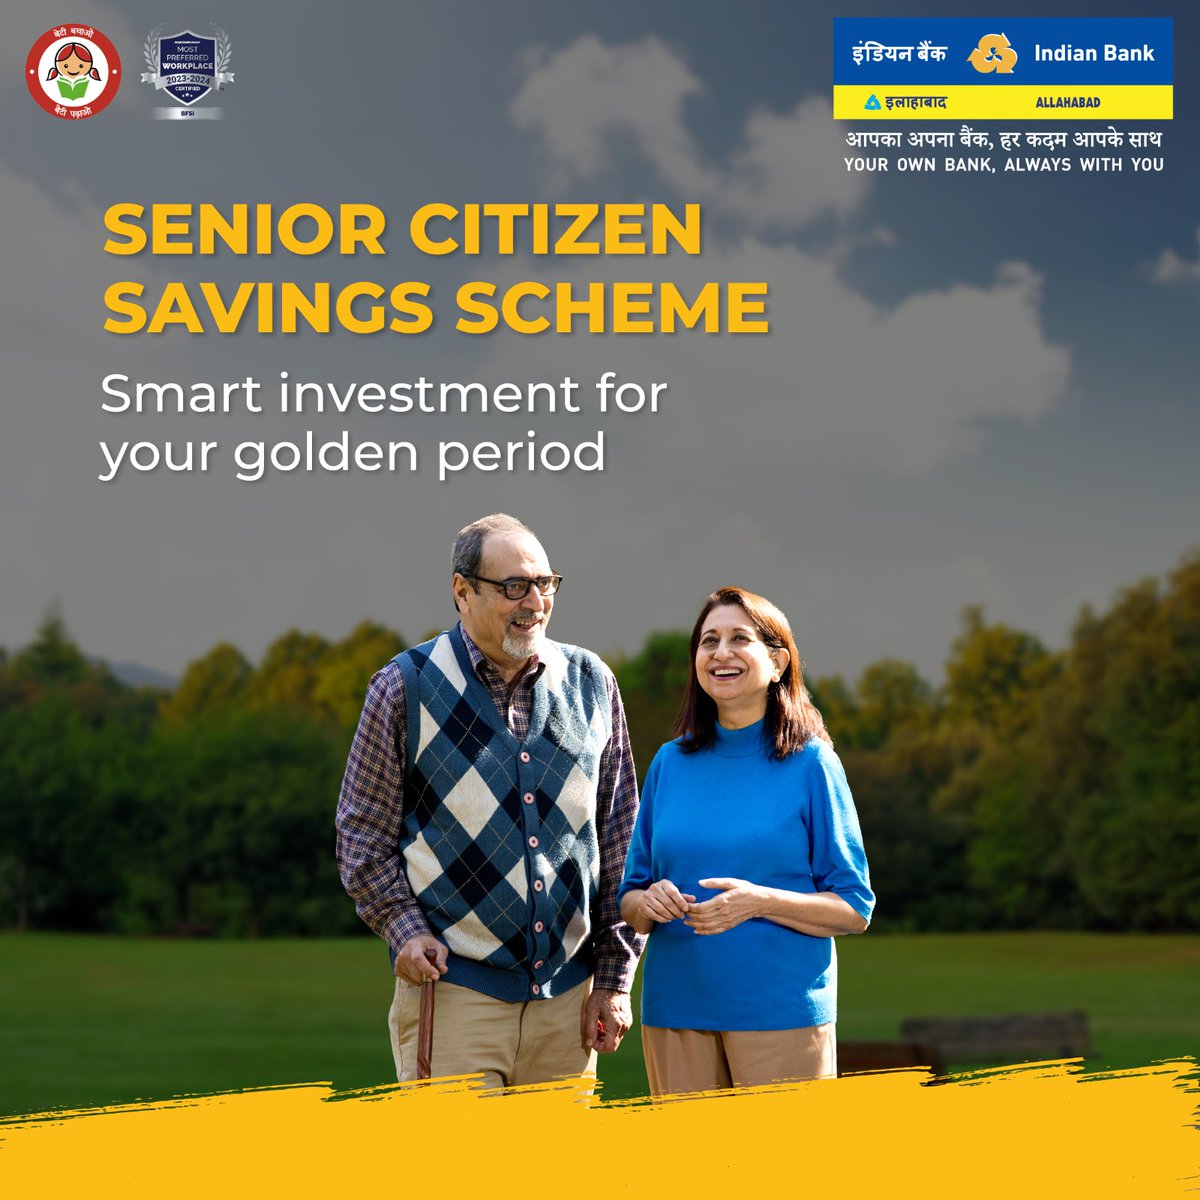 Ensure a peaceful retirement with Senior Citizen Savings Scheme, a Government-backed deposit scheme with returns at 8.20%p.a. Your golden years deserve nothing less.

T&C Apply!
#IndianBank 
@DFS_India